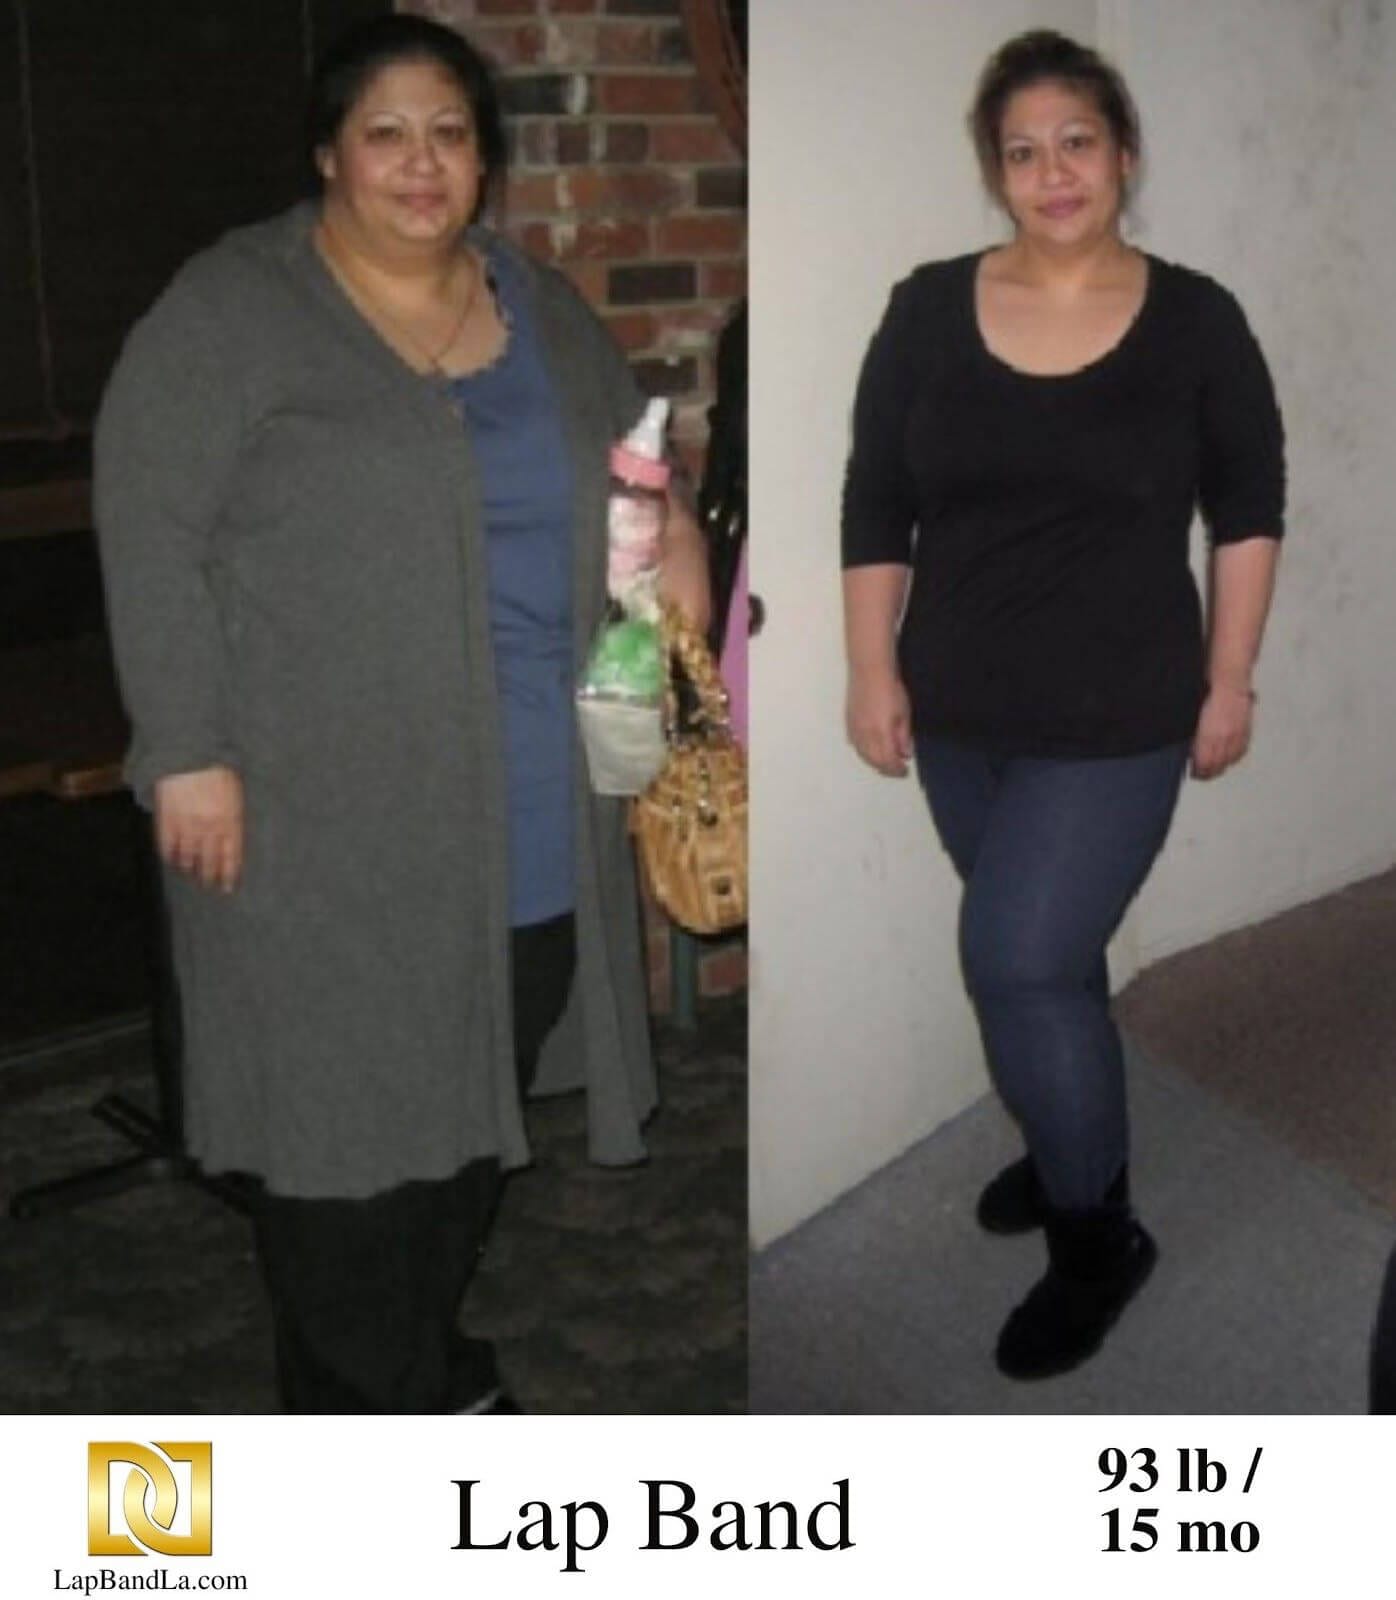 &Amp;Lt;H1 Class=&Amp;Quot;Hide_09&Amp;Quot;&Amp;Gt;Bariatric Surgery &Amp;Lt;Br&Amp;Gt;Before And After - Anita S.&Amp;Lt;/H1&Amp;Gt; | Success_Storie | The Weight Loss Surgery Center Of Los Angeles | Dr. David Davtyan